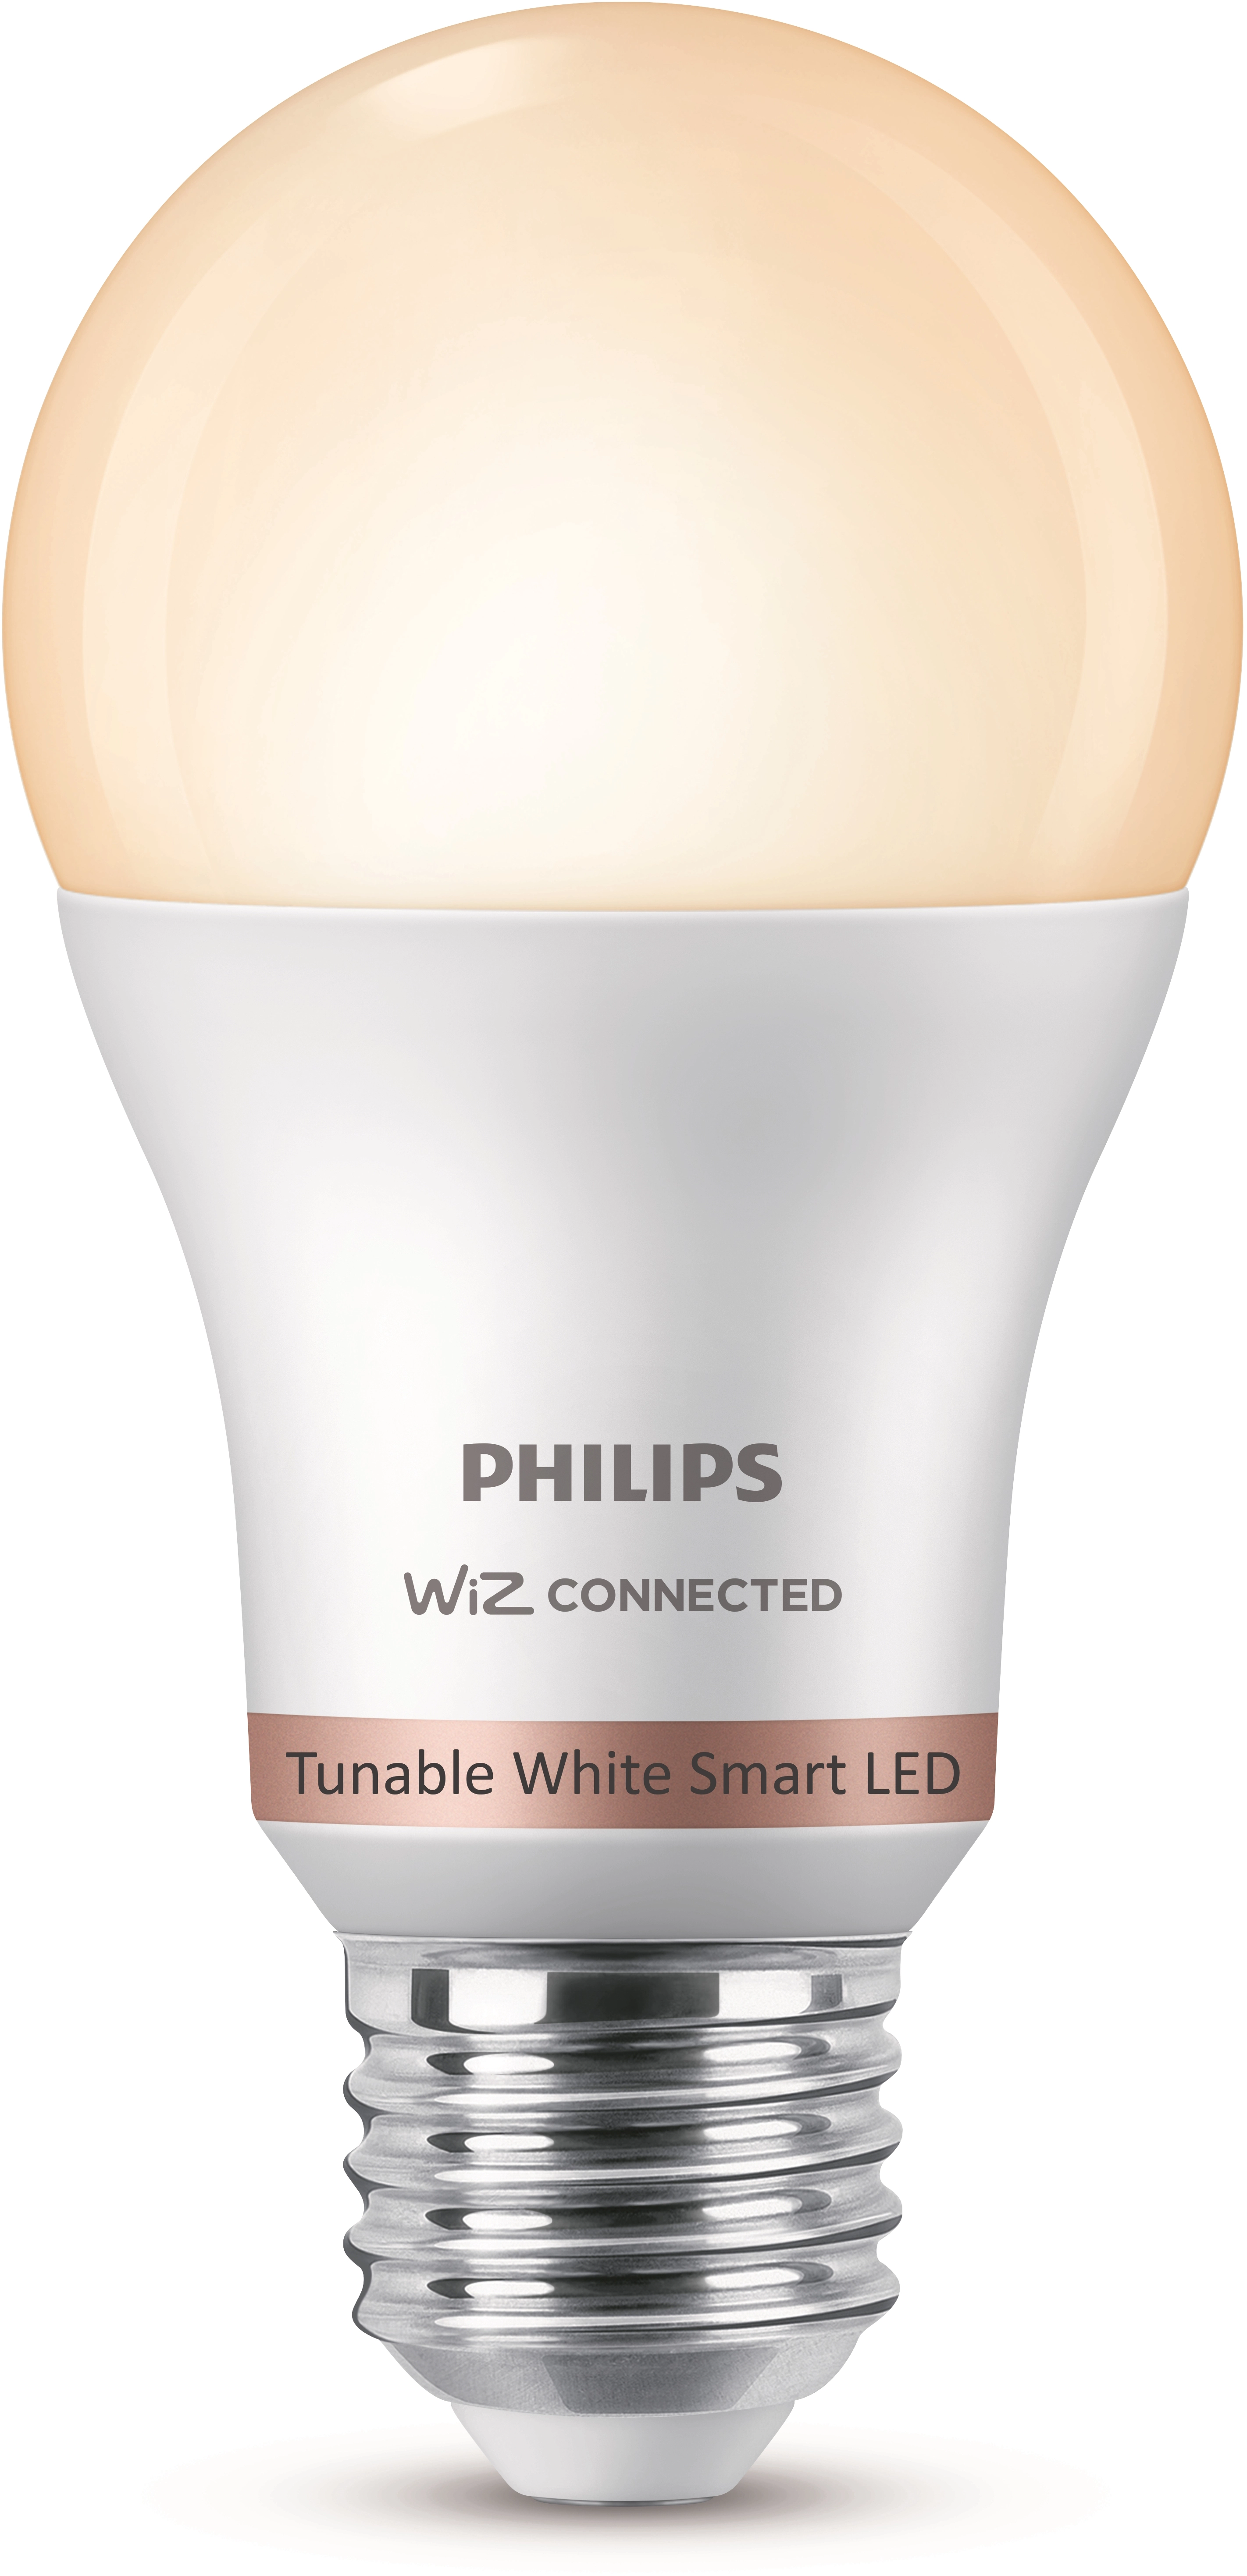 Philips LED smart Standard Tunable White dimmerabile E27 / 60 W / 806 lm